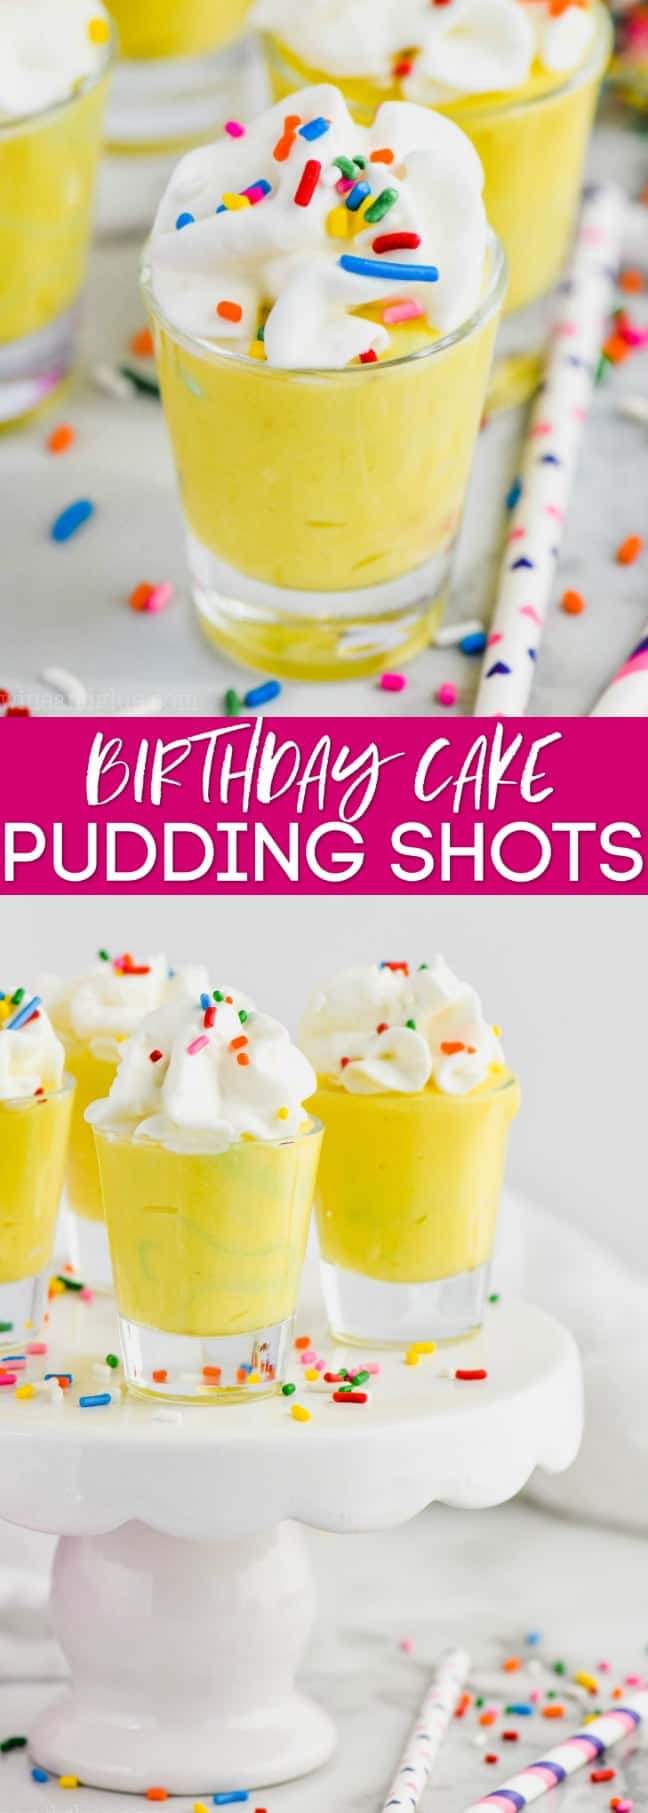 collage of photos of birthday cake pudding shots